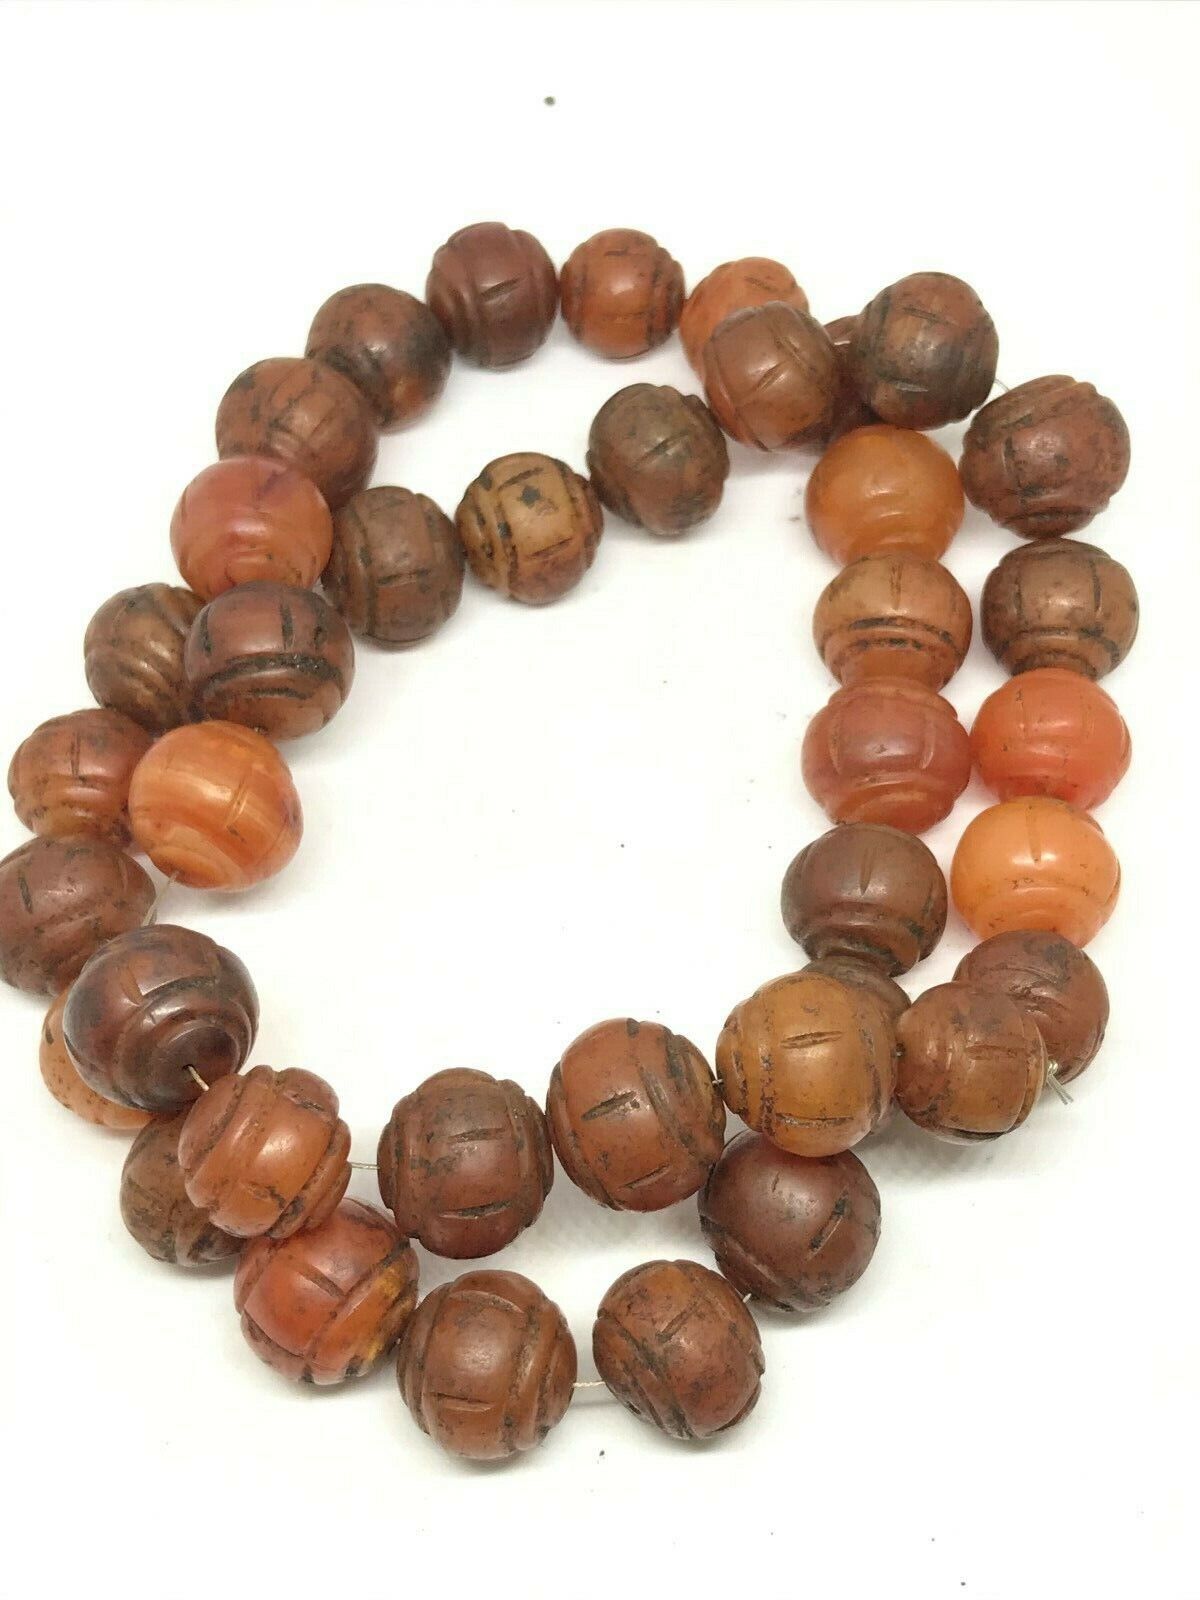 Nepalese Himalayan Collection Of Vintage Antique Style Carnelian Old Beads Lot